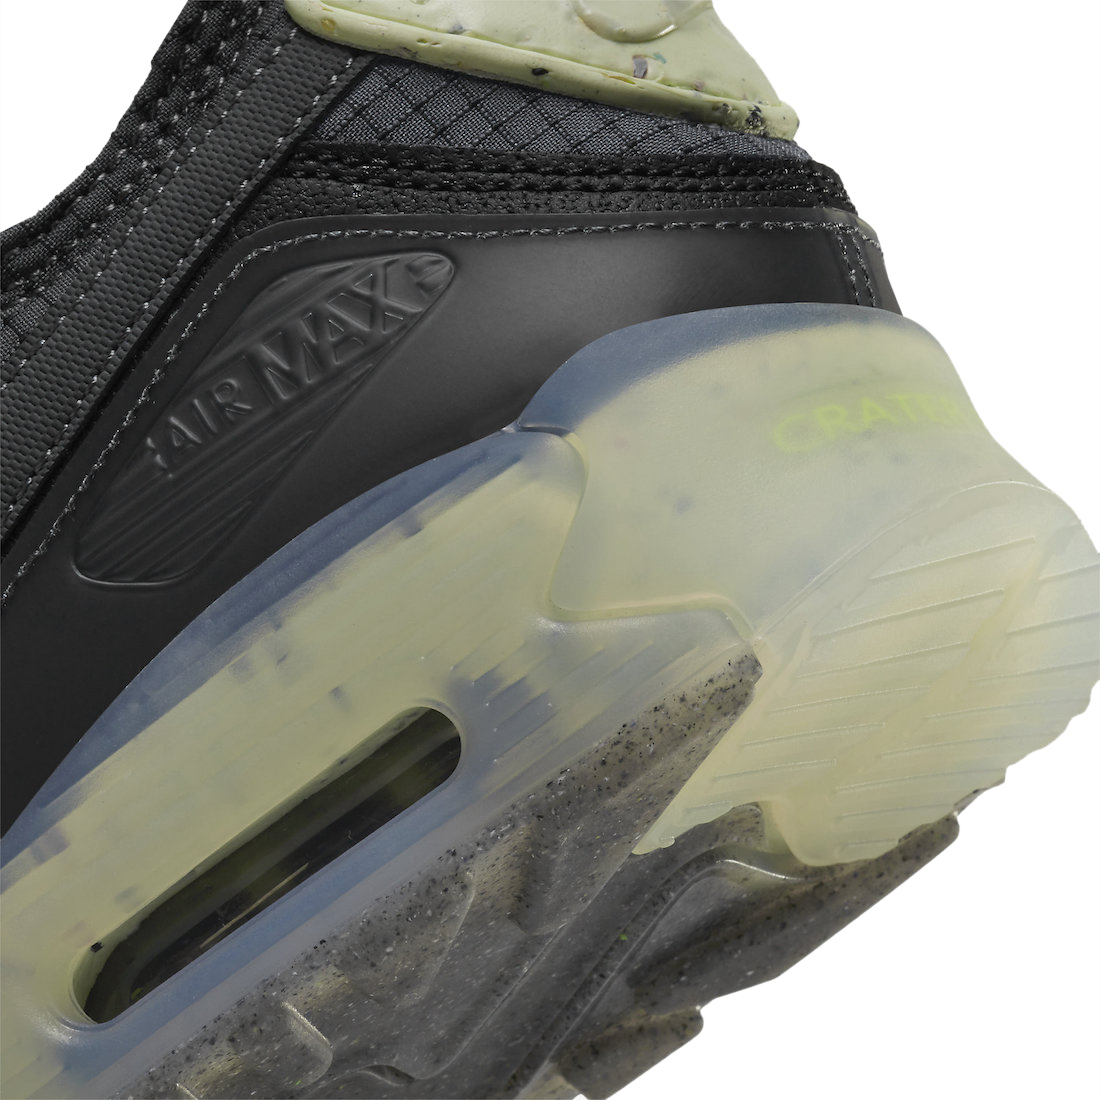 Nike Air Max 90 Terrascape Anthracite - Oct 2021 - DH2973-001